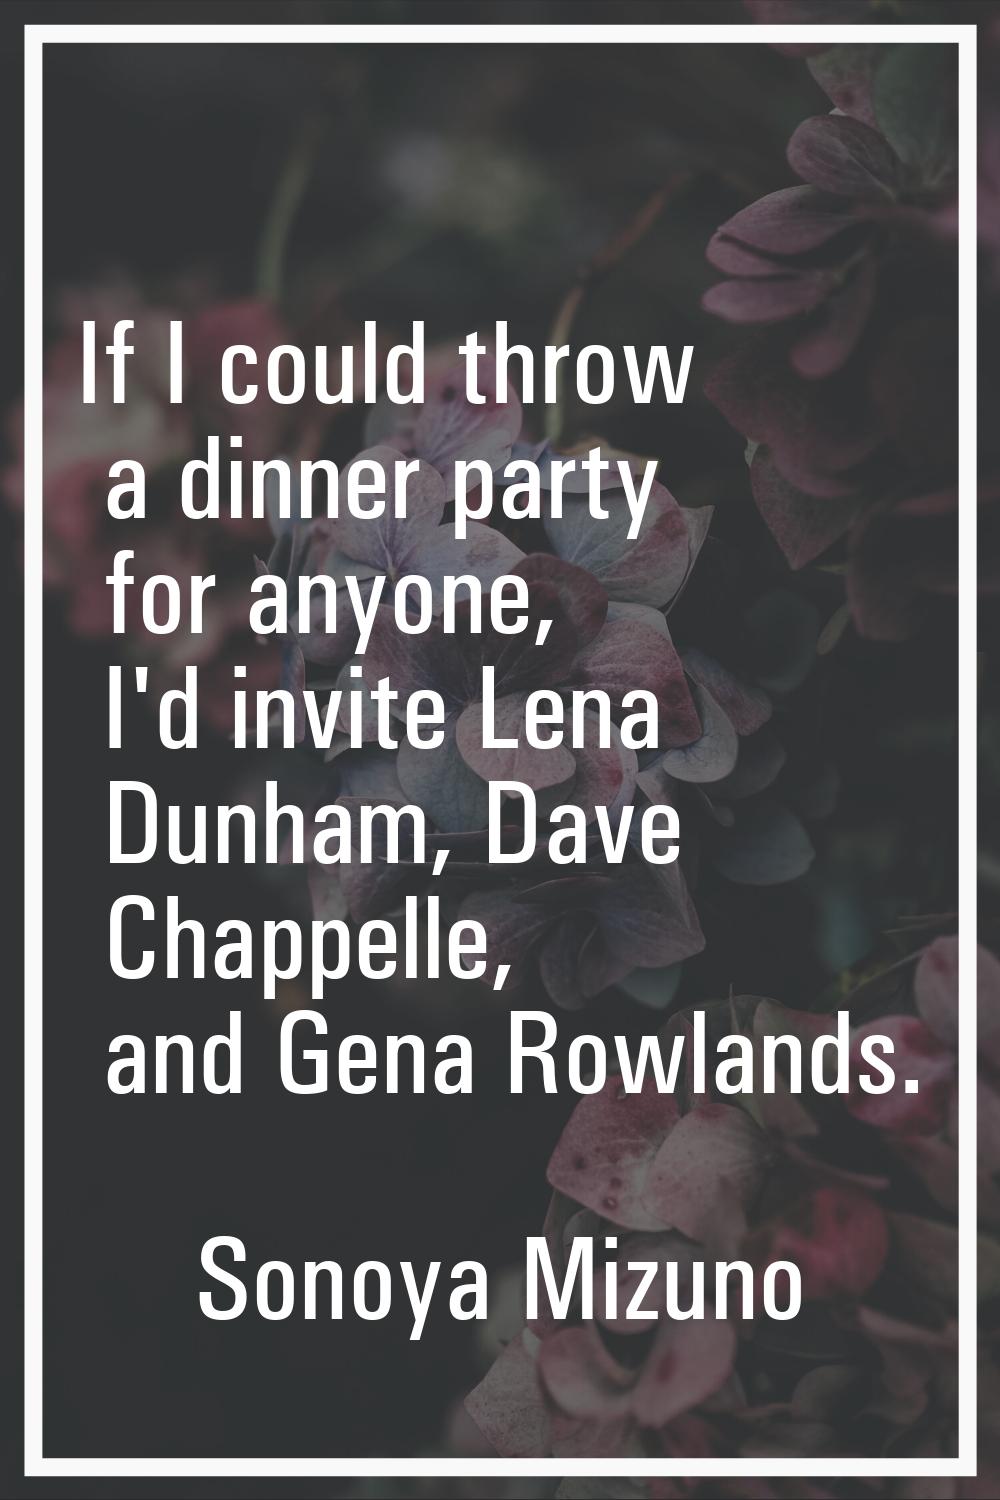 If I could throw a dinner party for anyone, I'd invite Lena Dunham, Dave Chappelle, and Gena Rowlan